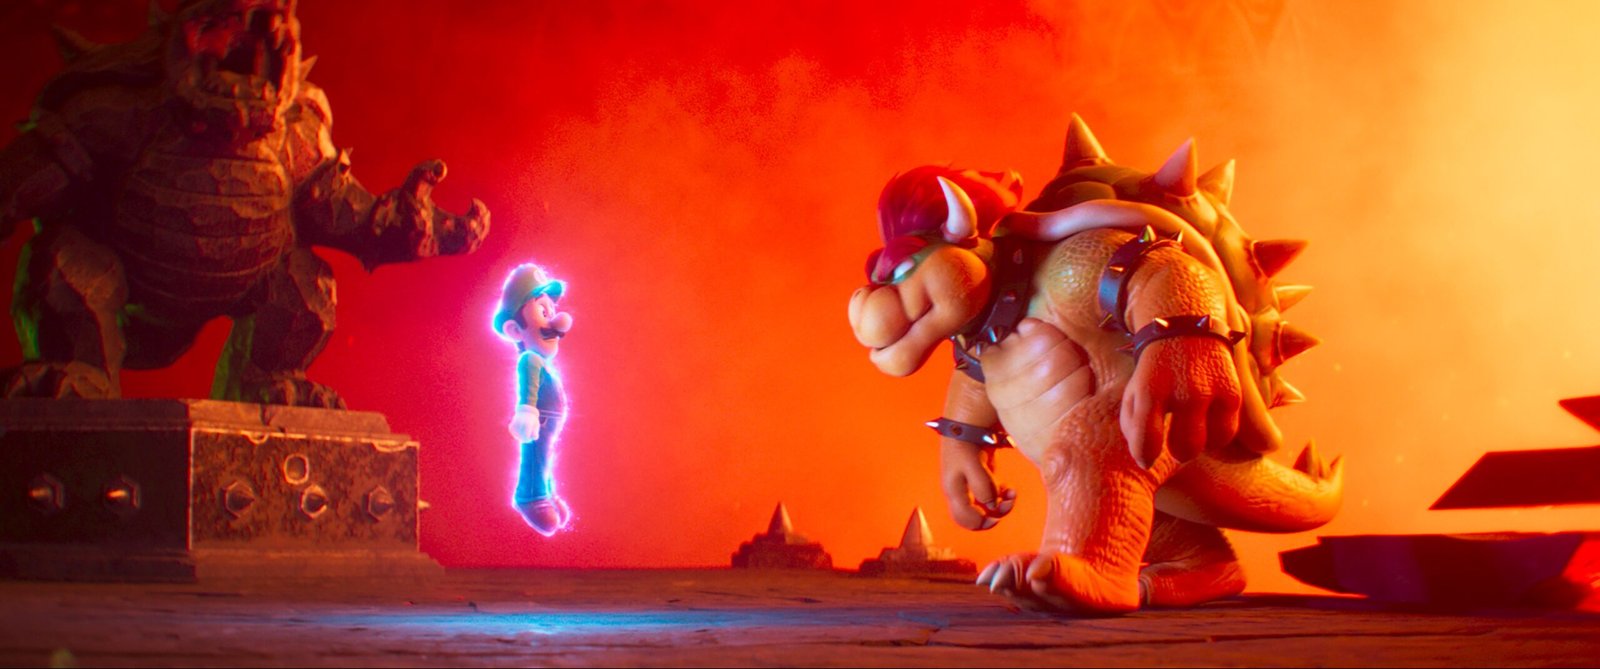 (from left) Luigi (Charlie Day) and Bowser (Jack Black) in Nintendo and Illumination’s The Super Mario Bros. Movie, directed by Aaron Horvath and Michael Jelenic.